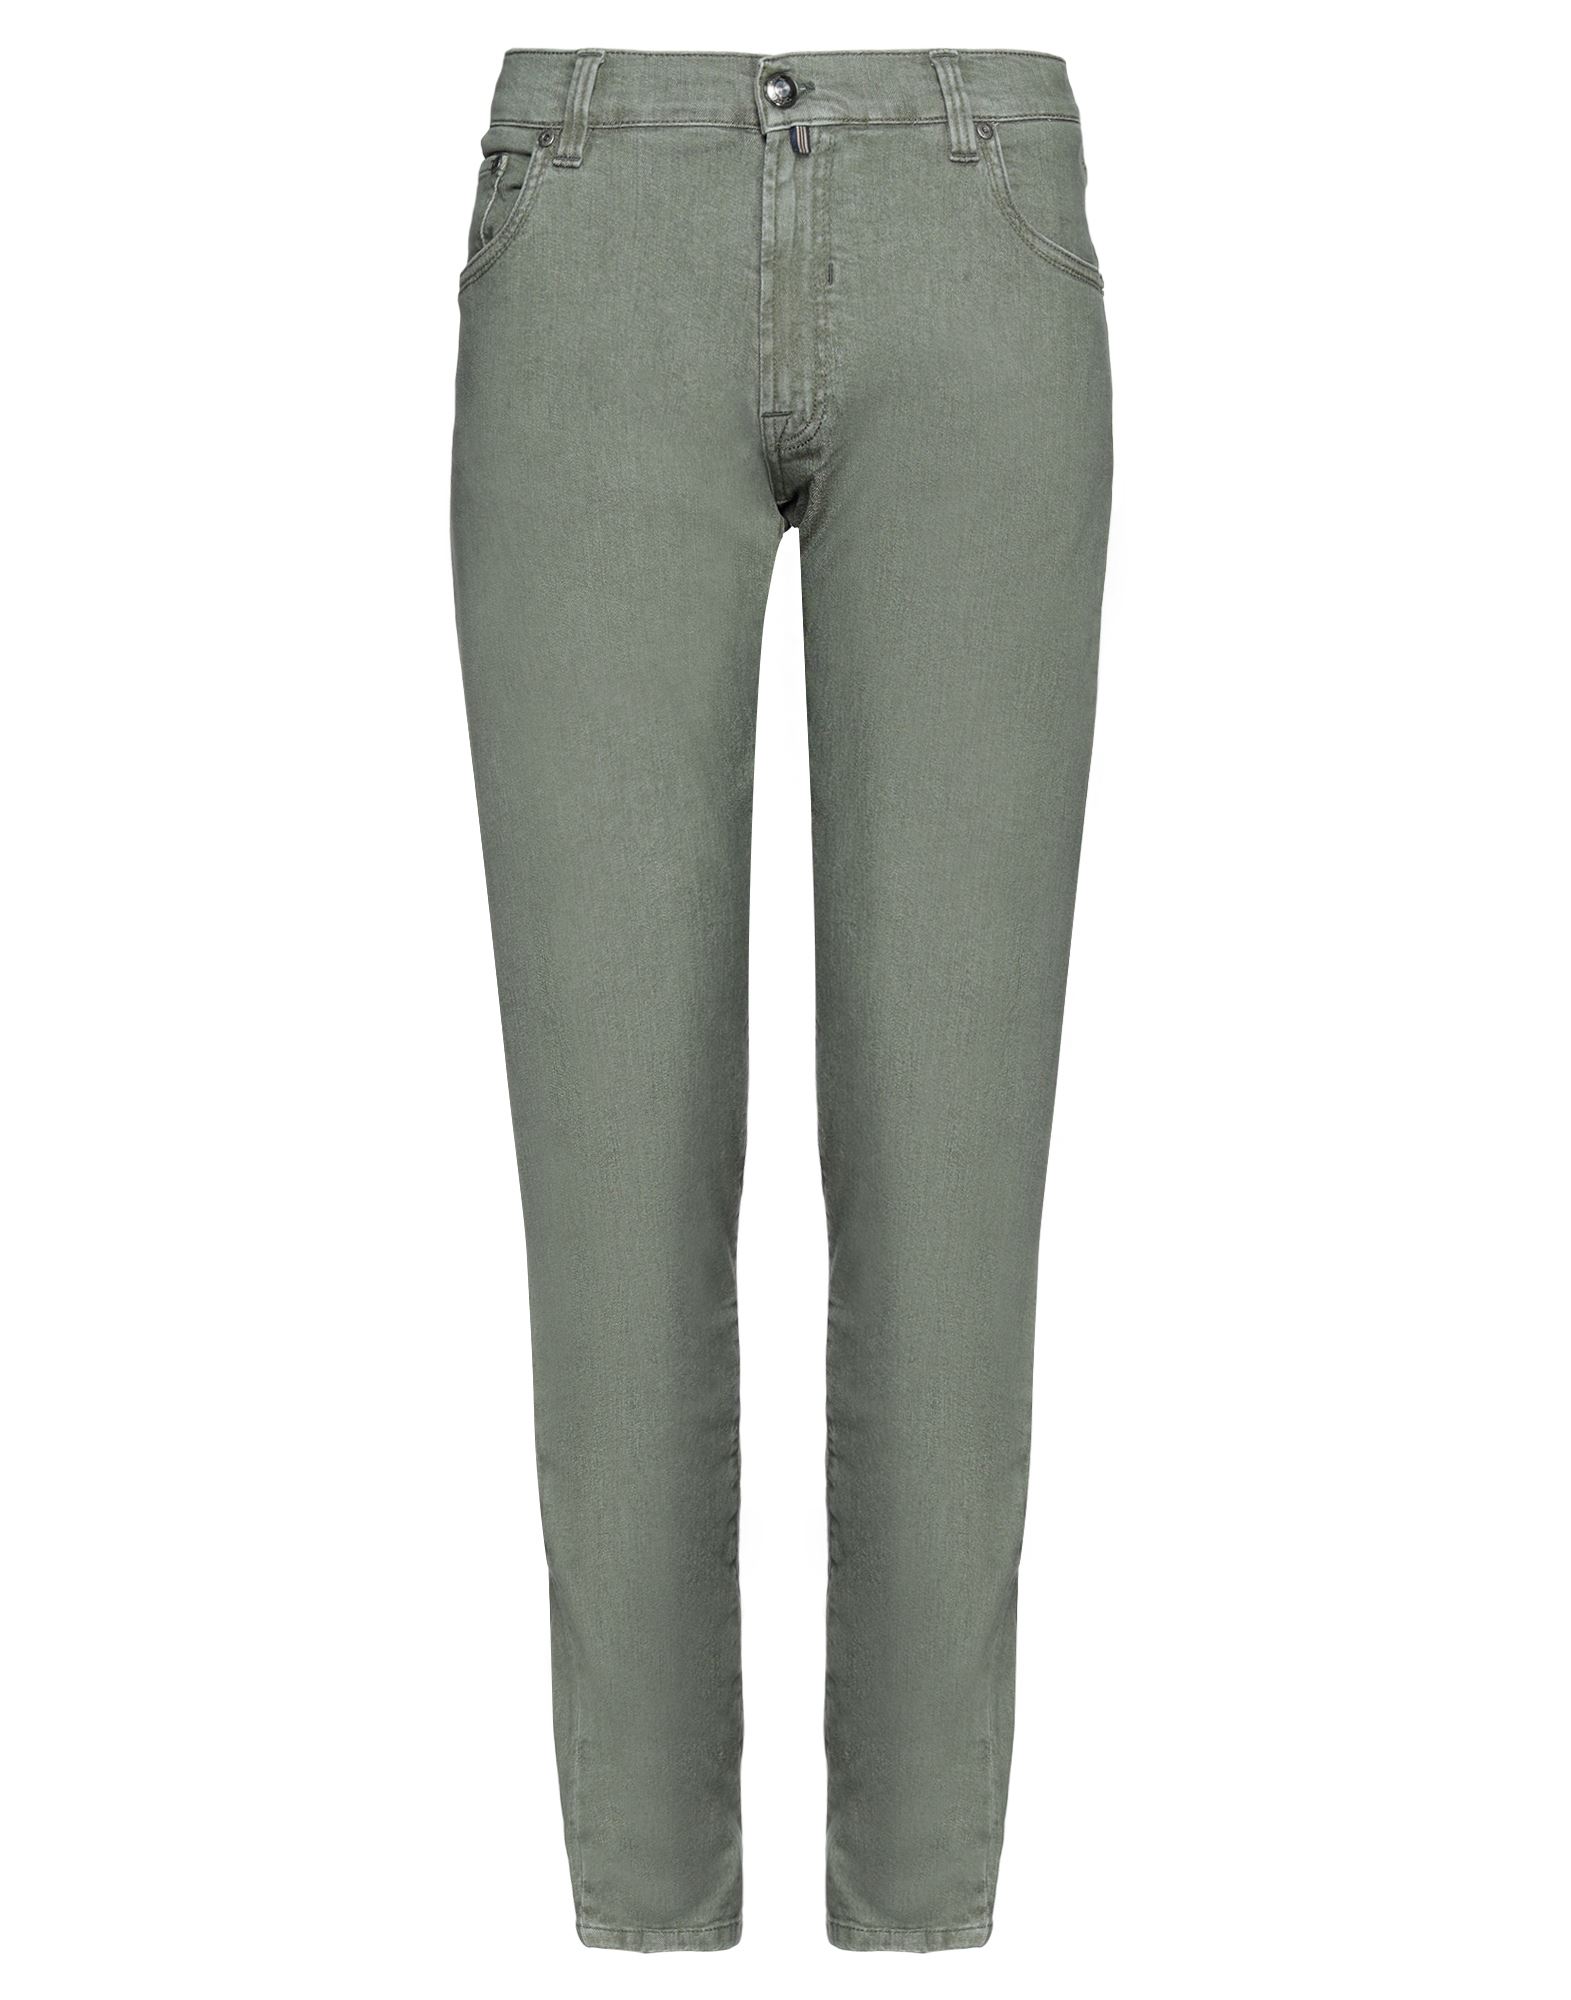 Nicwave Jeans In Military Green | ModeSens